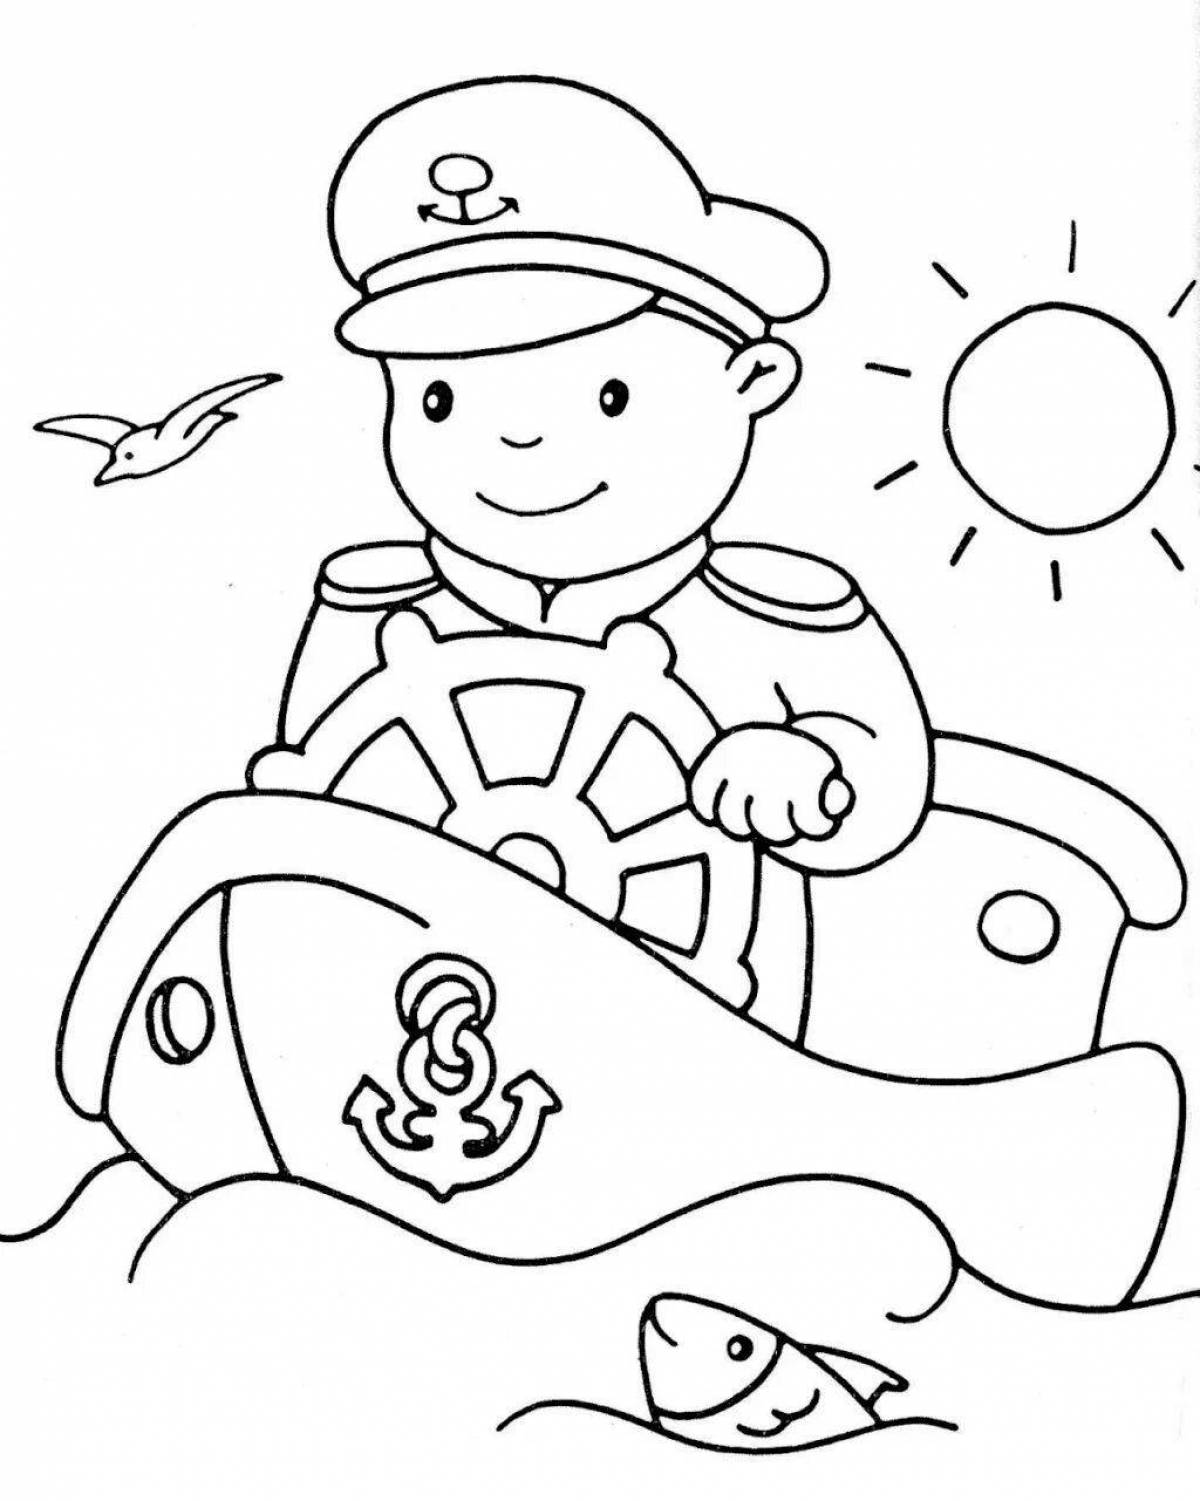 Coloring page joyful day of the defender of the fatherland